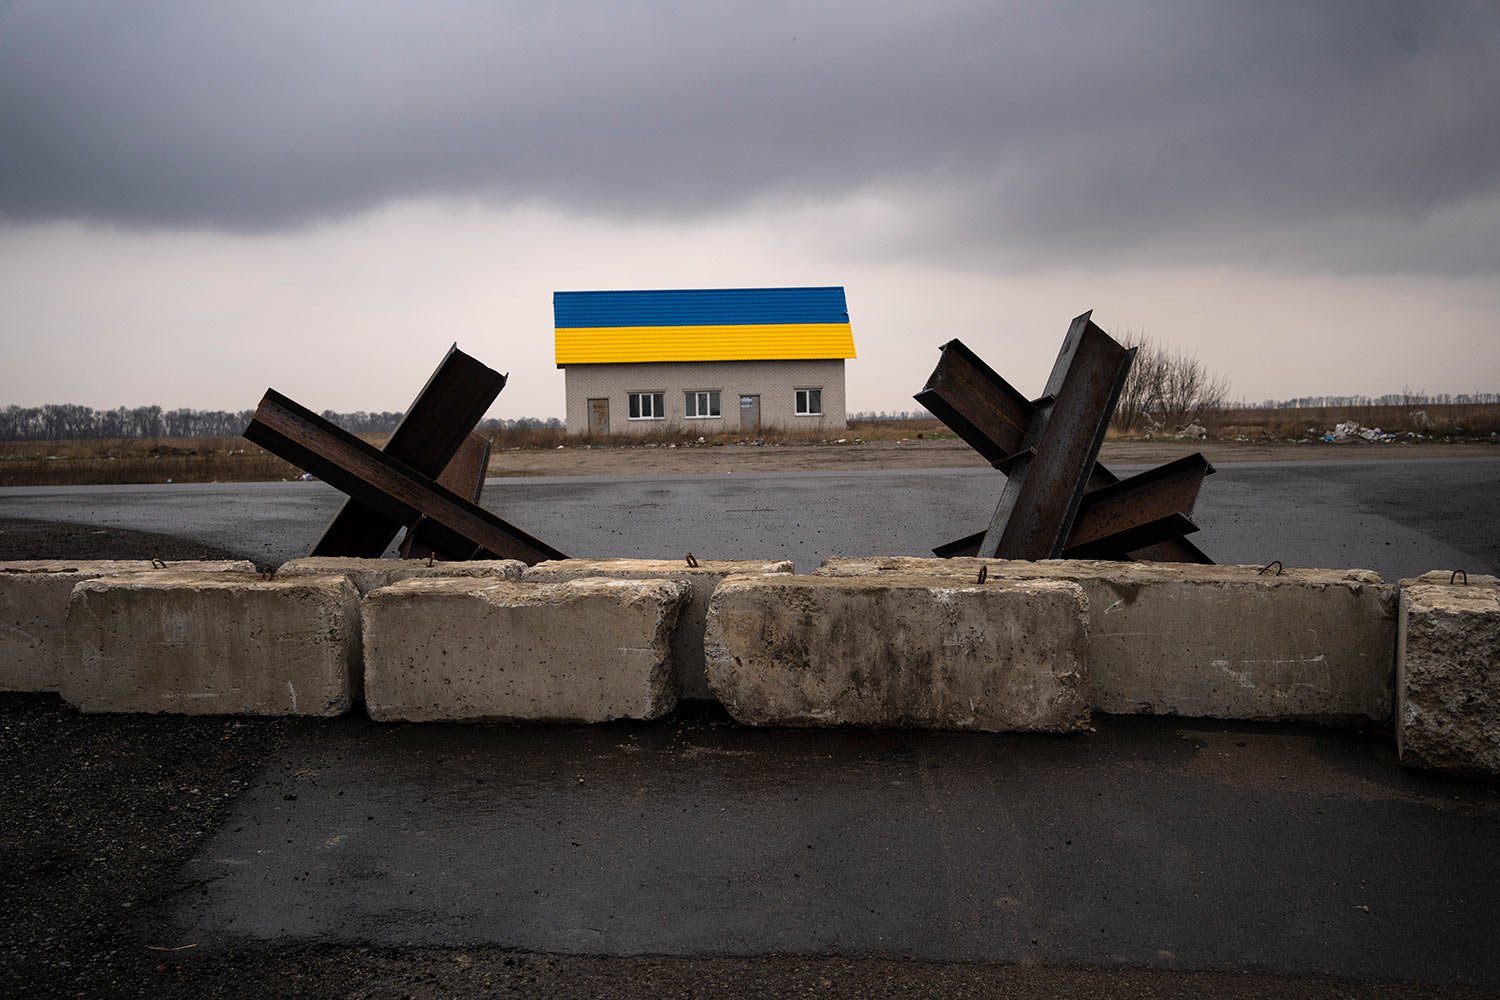  Anti-tank barriers are displayed near a house painted with the colors of the Ukraine flag near Malaya Alexandrovka village, on the outskirts of Kyiv, Ukraine, Wednesday, March 30, 2022. (AP Photo/Rodrigo Abd) 